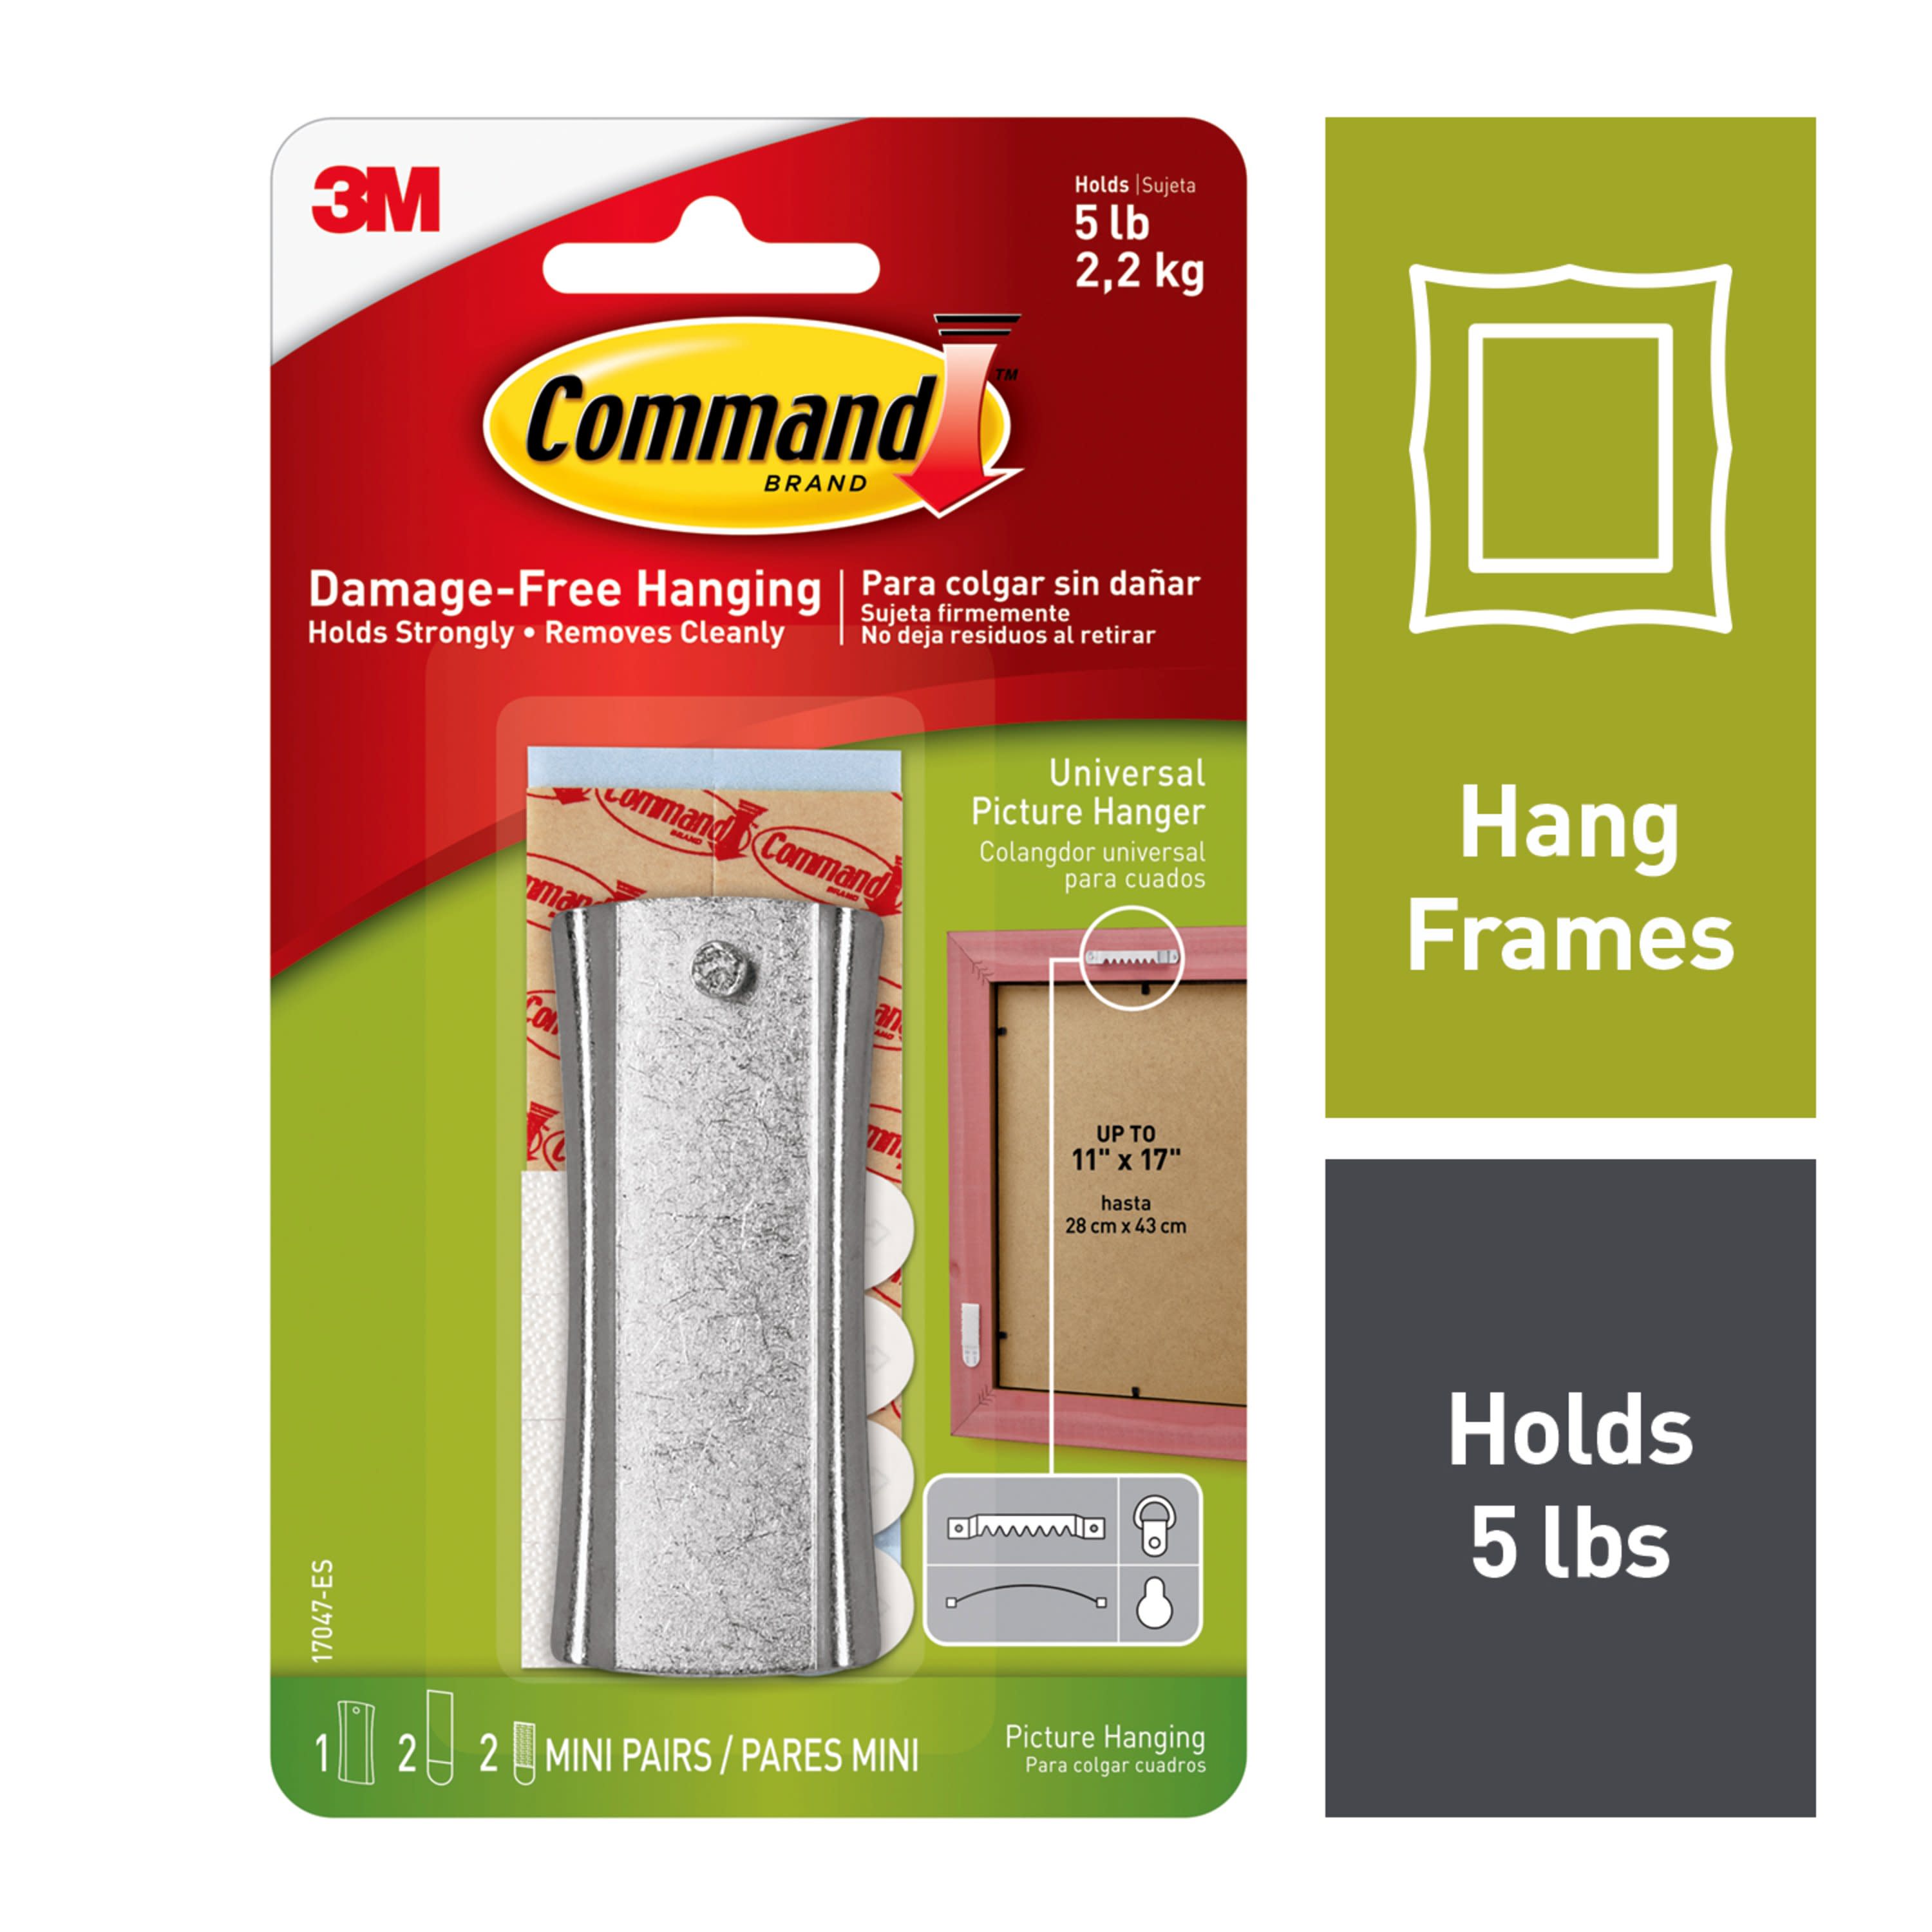 3M Command picture hagning strips & Command strips,command strips,3M  command hook,3M Command picture hanging strips